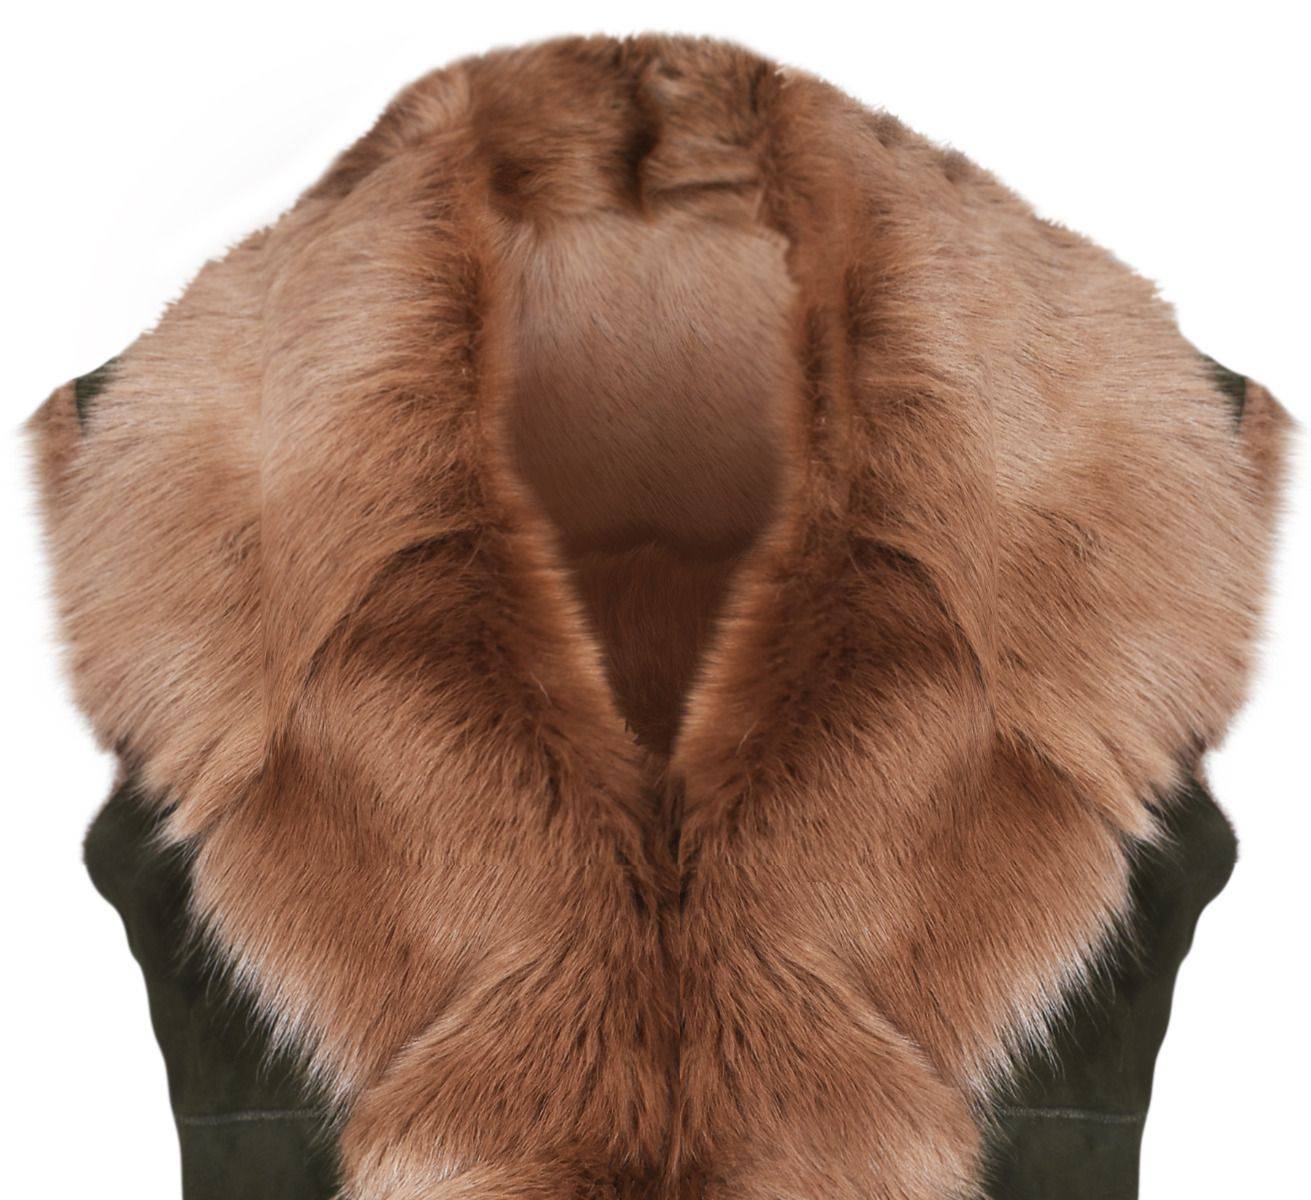 Olive Ladies Toscana Sheepskin Gilet for sale - Woodcock and Cavendish